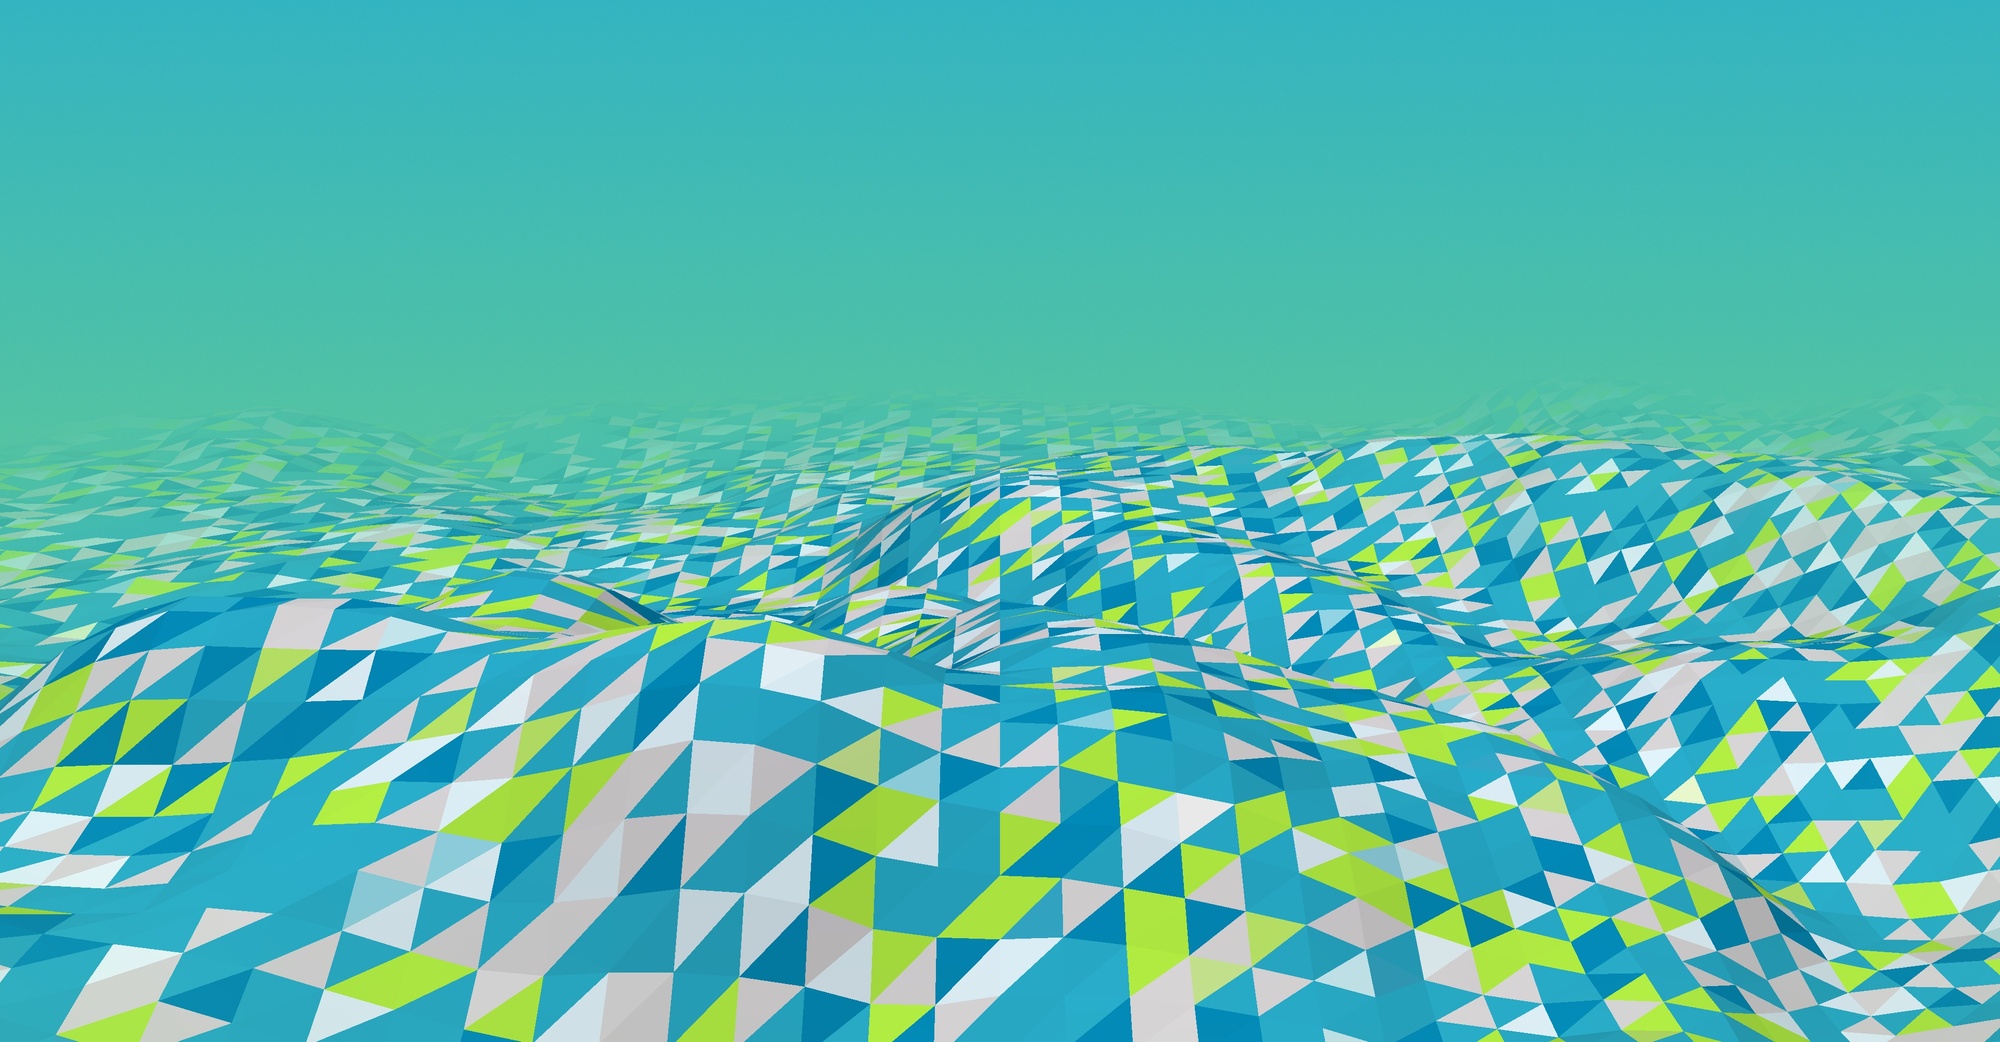 Abstract content with teal and green geometric pattern